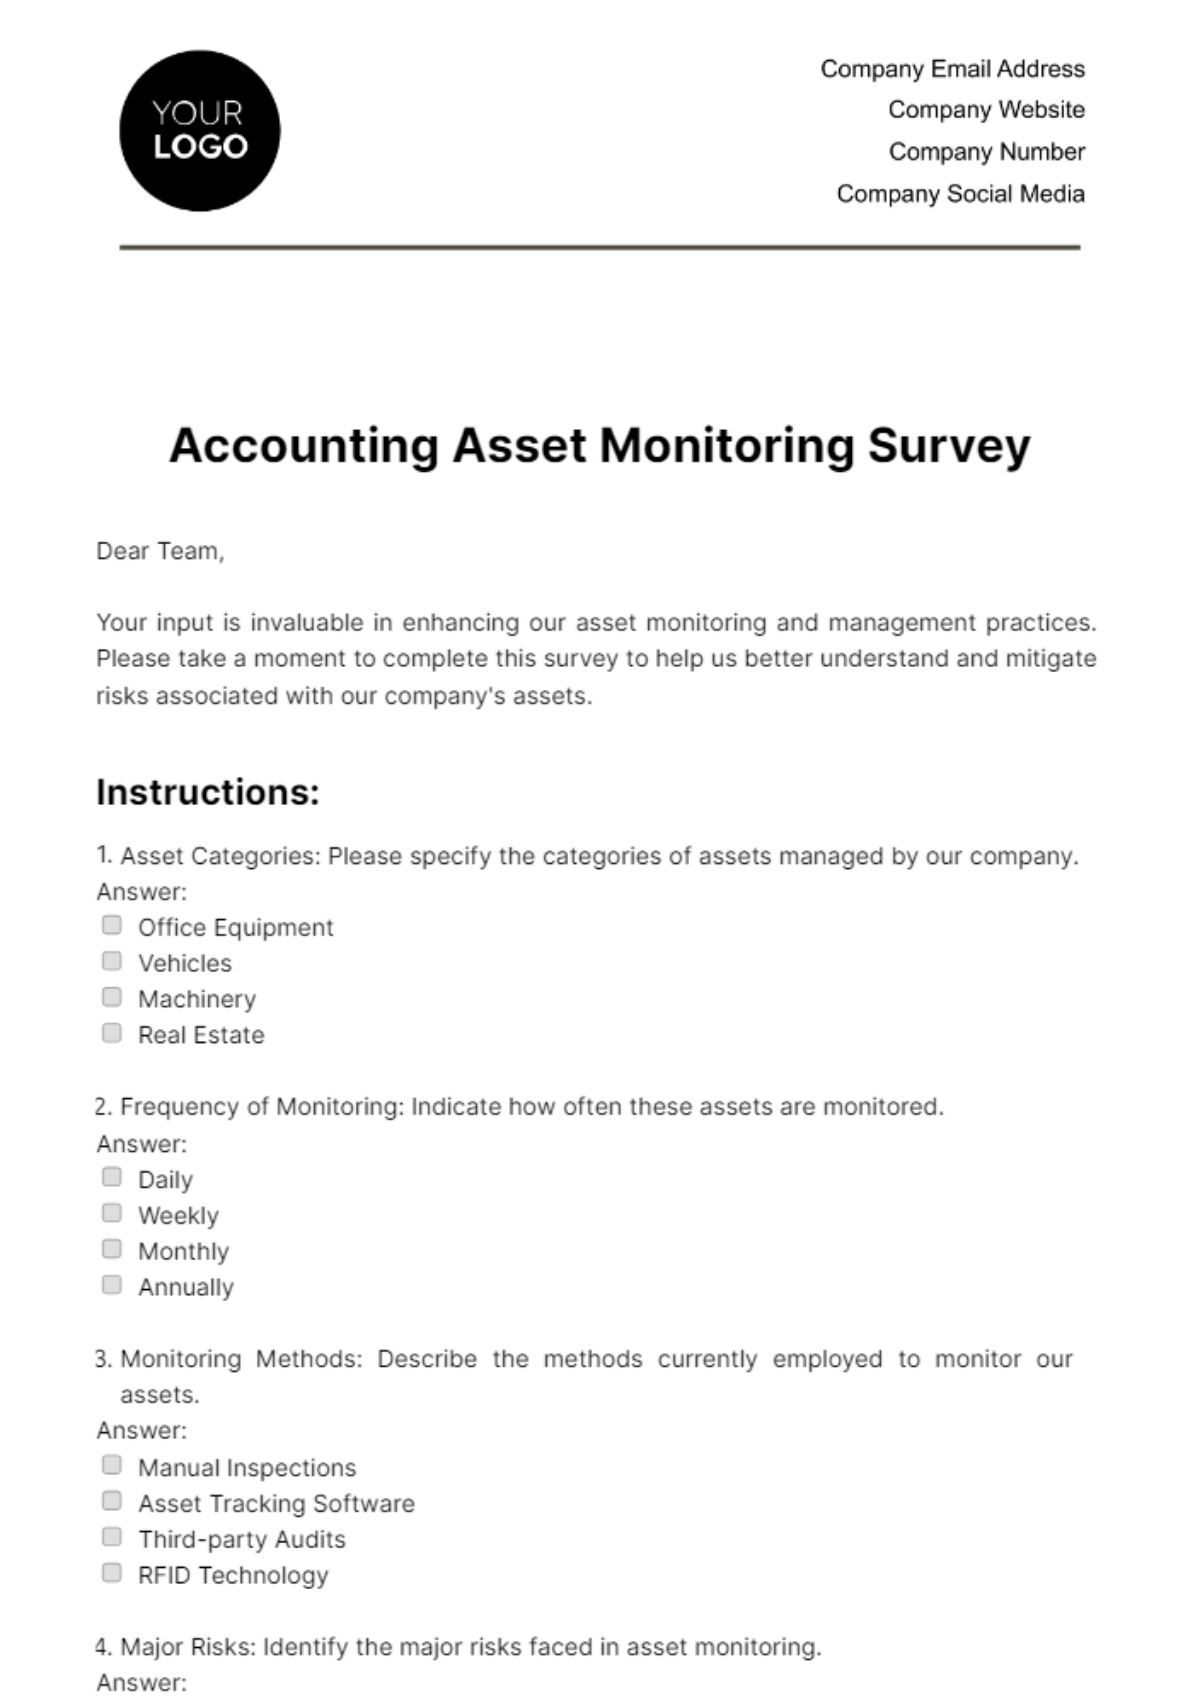 Accounting Asset Monitoring Survey Template